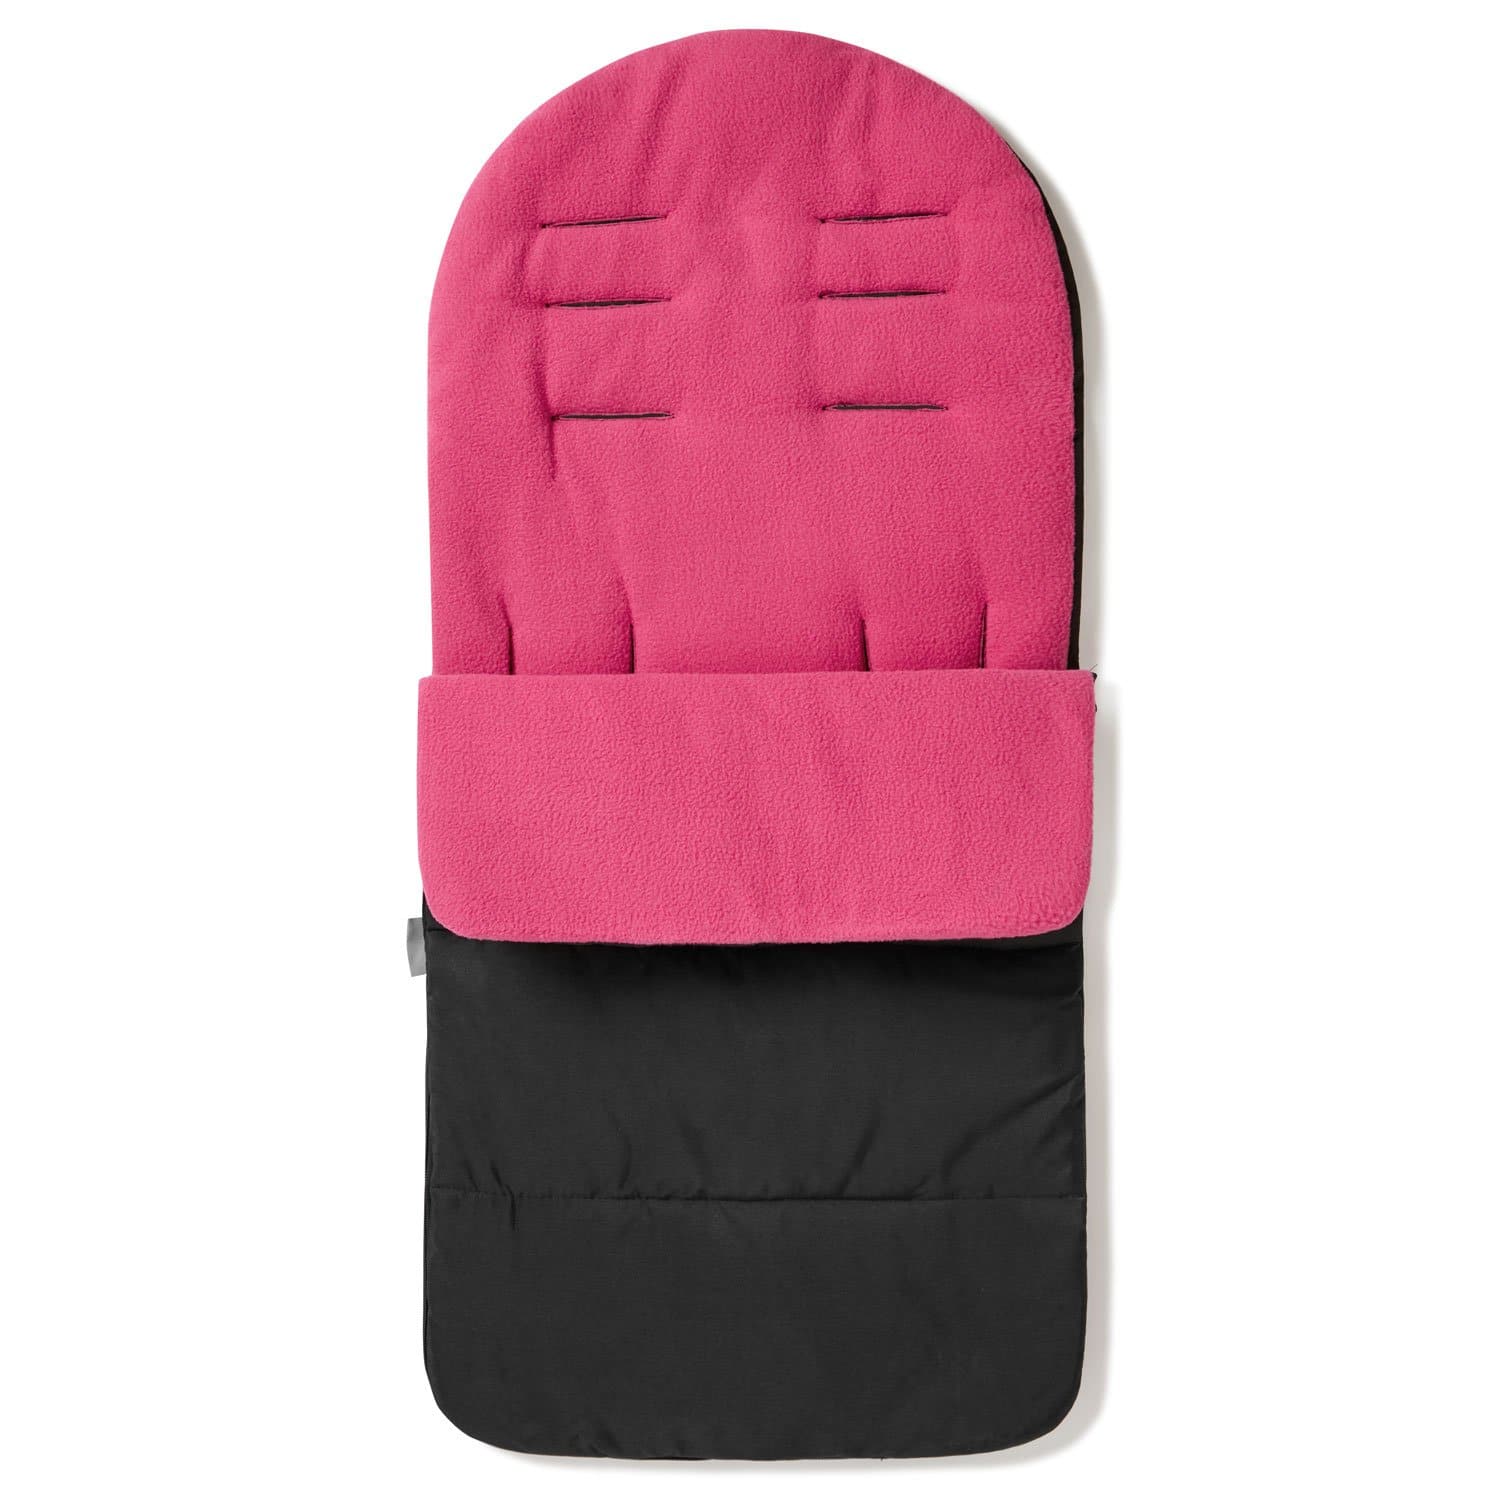 Premium Footmuff / Cosy Toes Compatible with Graco - Pink Rose / Fits All Models | For Your Little One